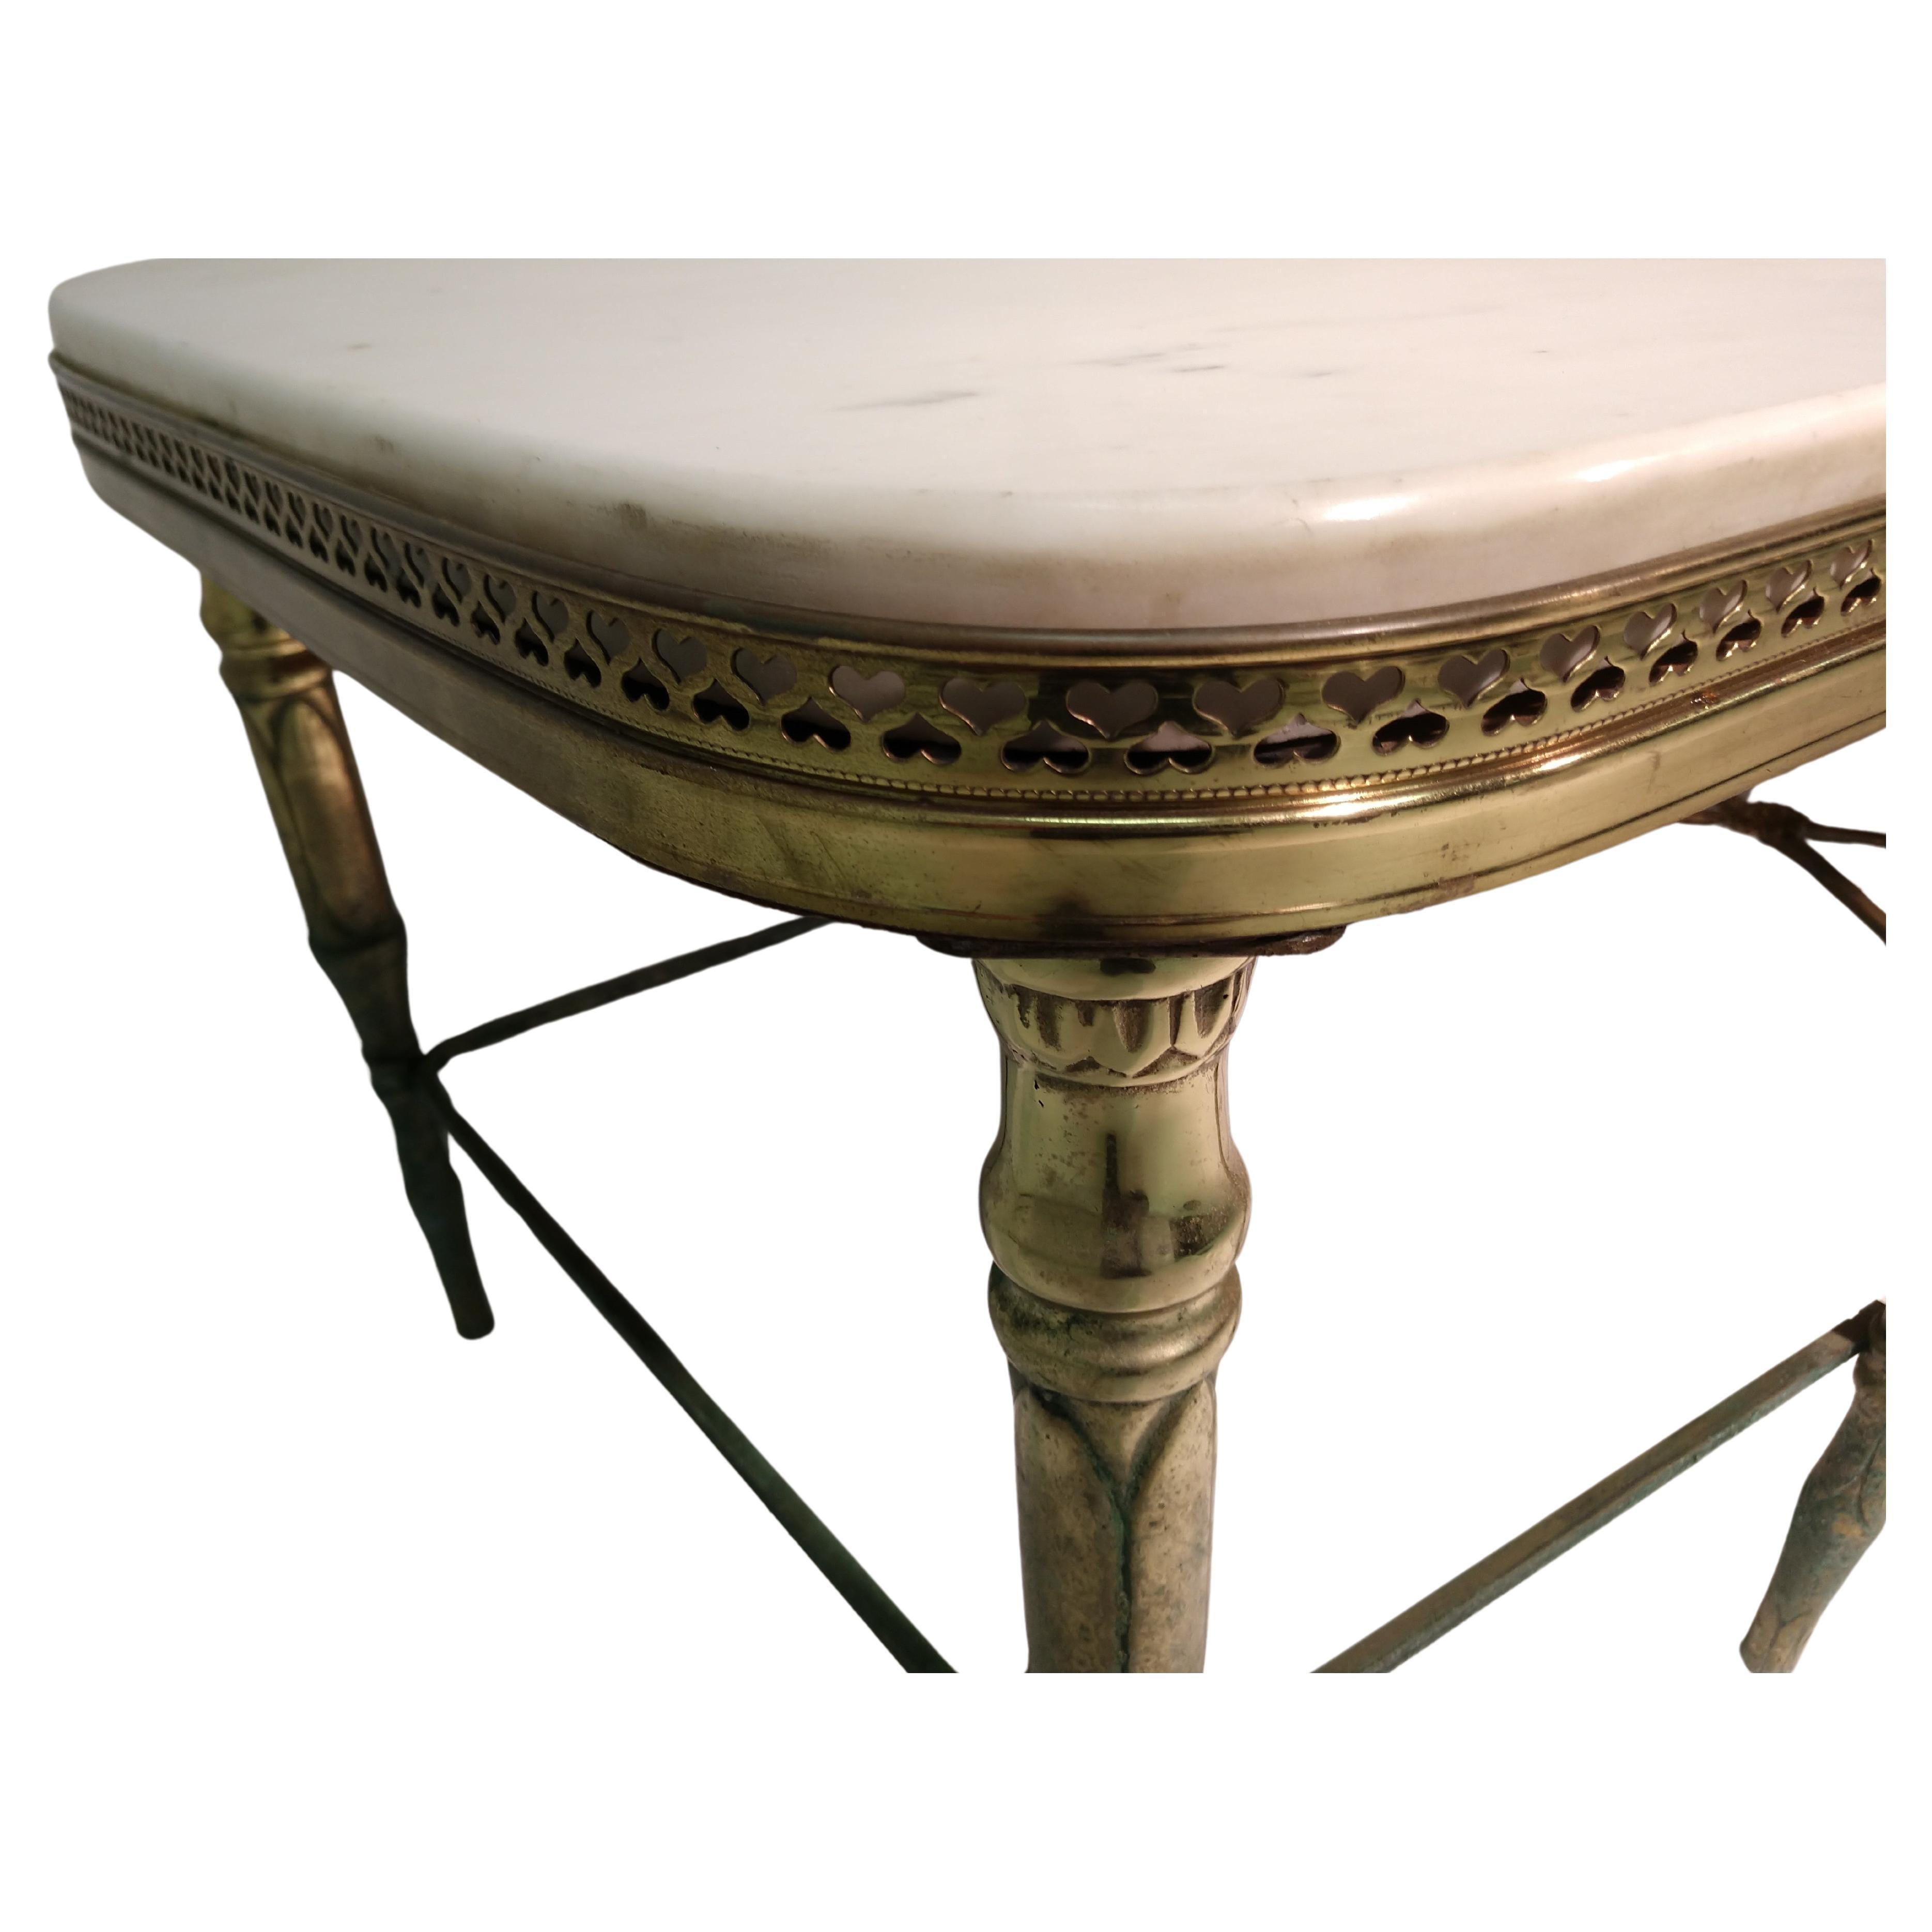 Three Piece Marble W/Brass Base French Neoclassical Cocktail Table In Good Condition For Sale In Port Jervis, NY